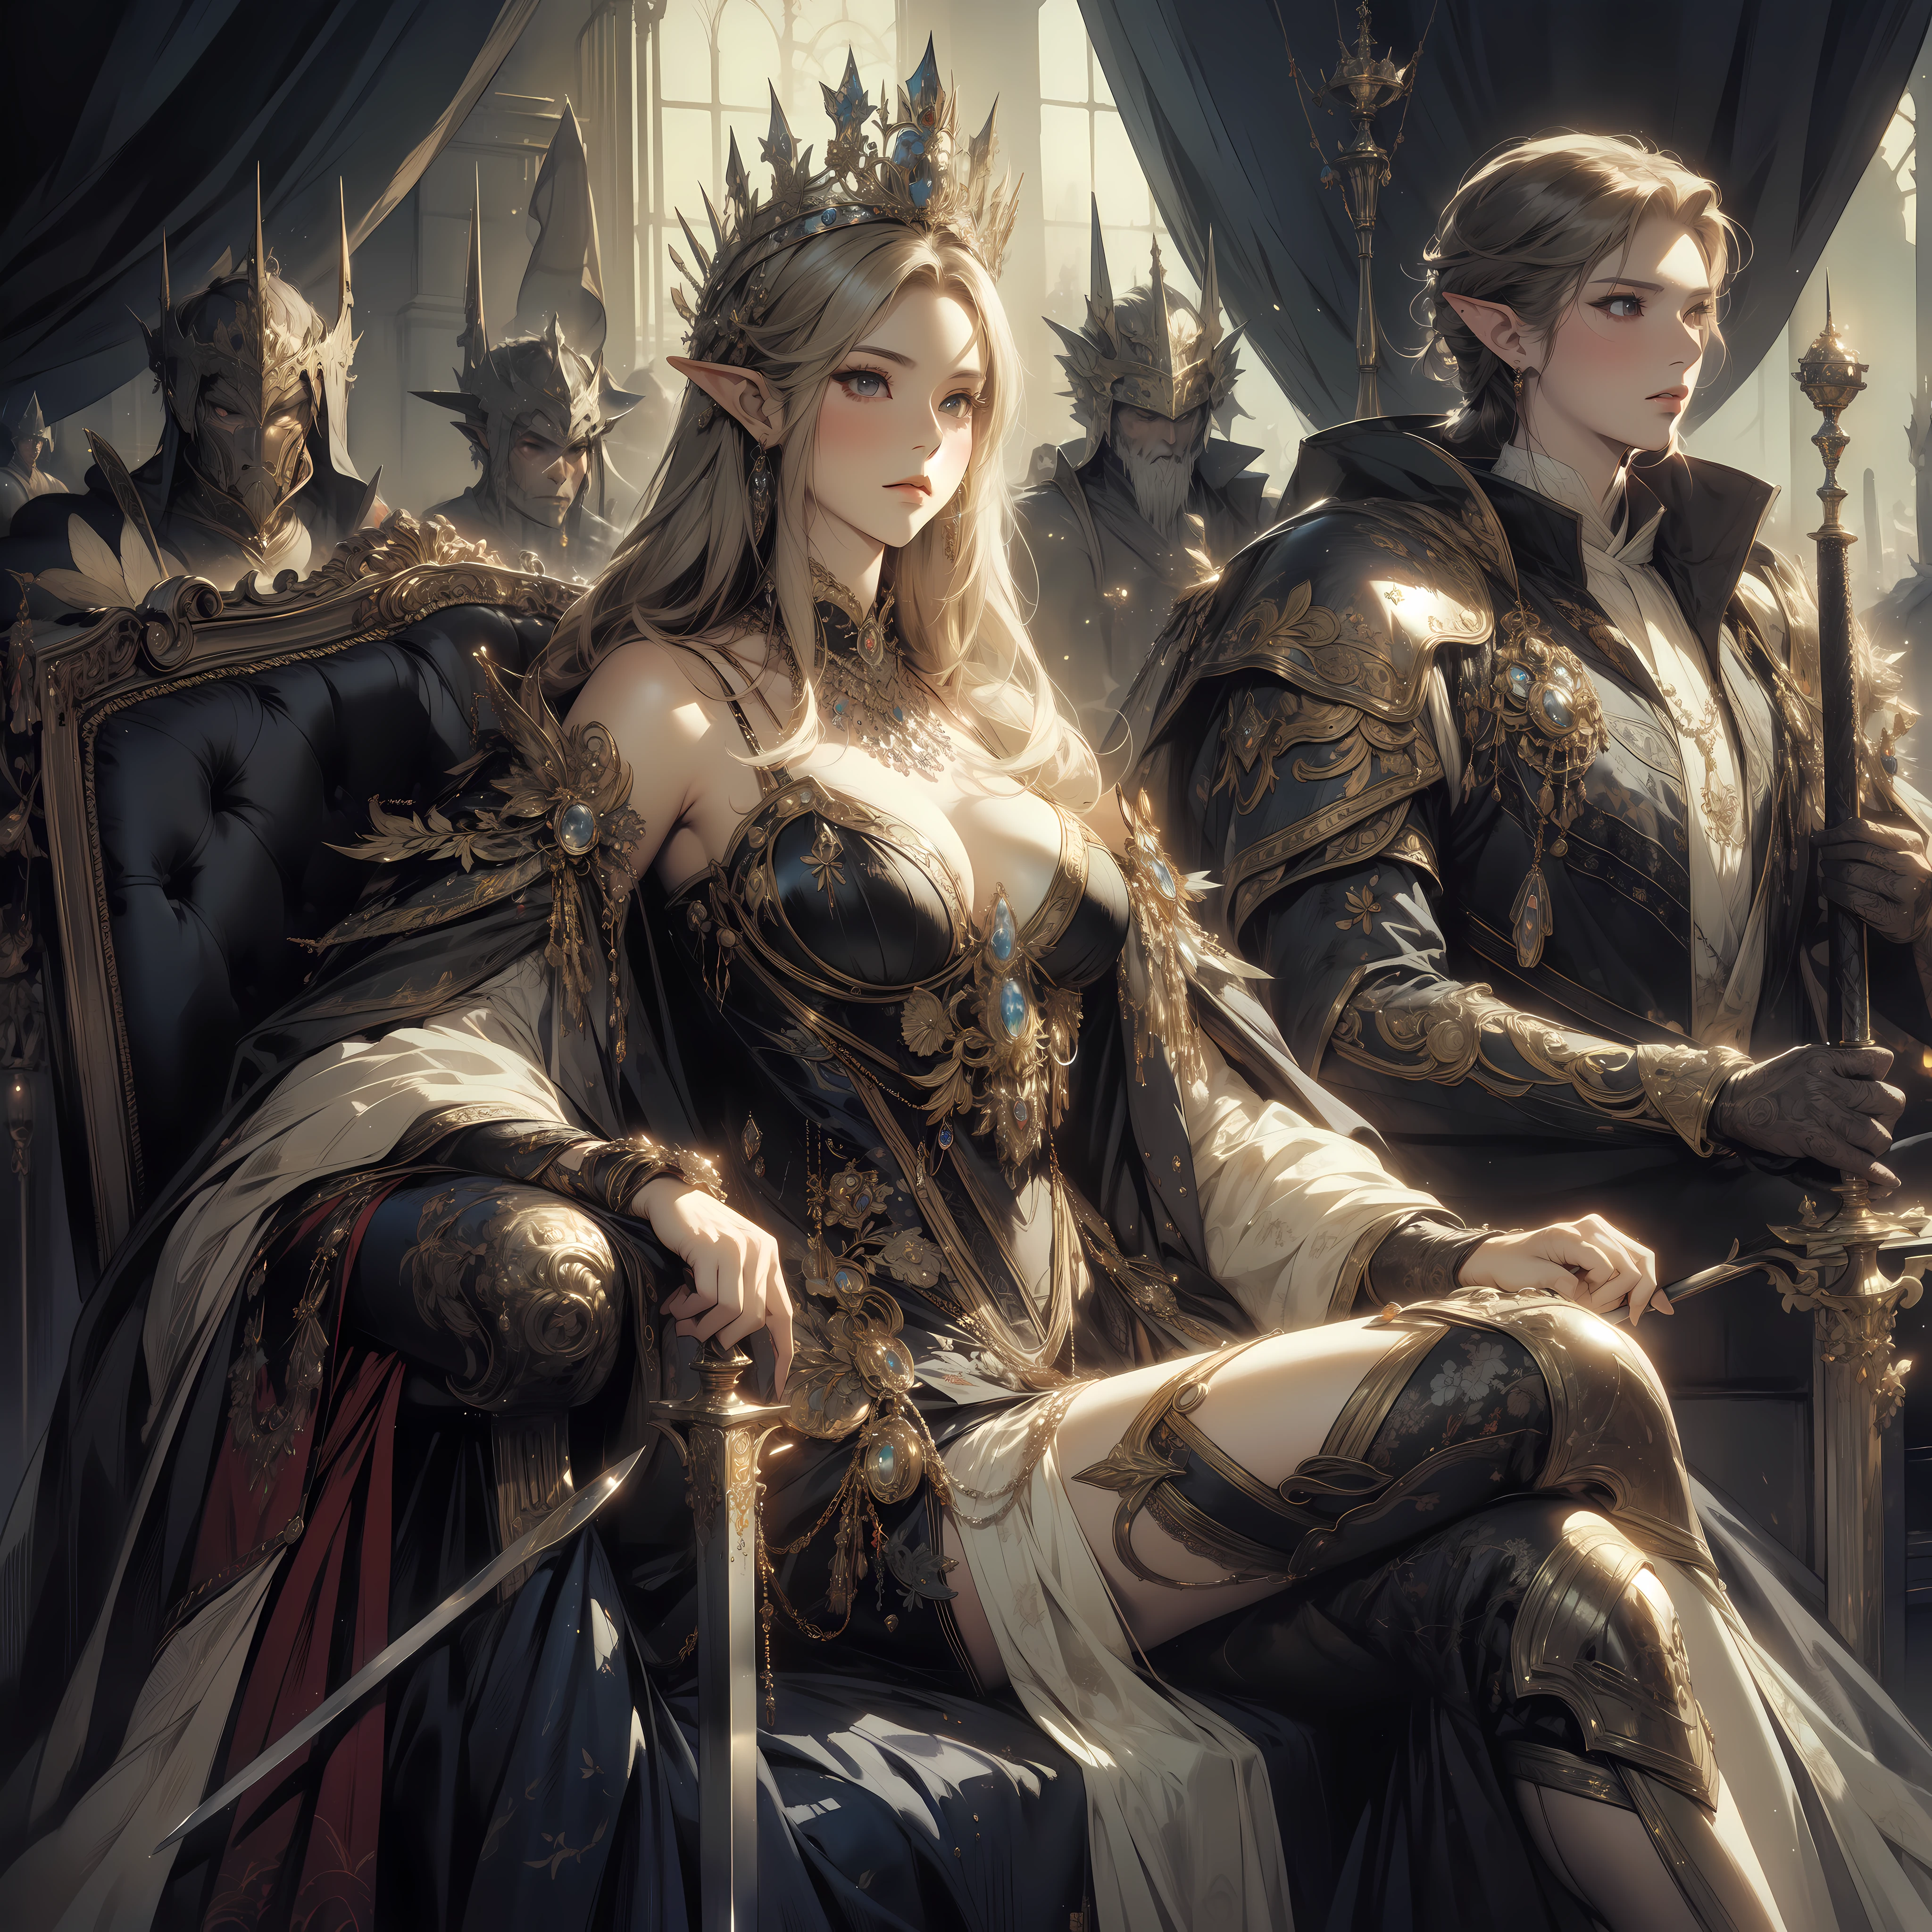 Seated in regal splendor, the elven queen exudes majesty and authority, her royal regalia and crown symbolizing her leadership. With determination, she holding a sword, while her devoted aides, dressed in knightly attire, stand vigilantly by her side, by Artgem, Dynamic shot, Dynamic pose, by Yoshitaka Amano, Mikimoto Haruhiko, frank frazetta, Cinematic Dramatic atmosphere, dark atmosfer, fantasy, 8k, watercolor painting